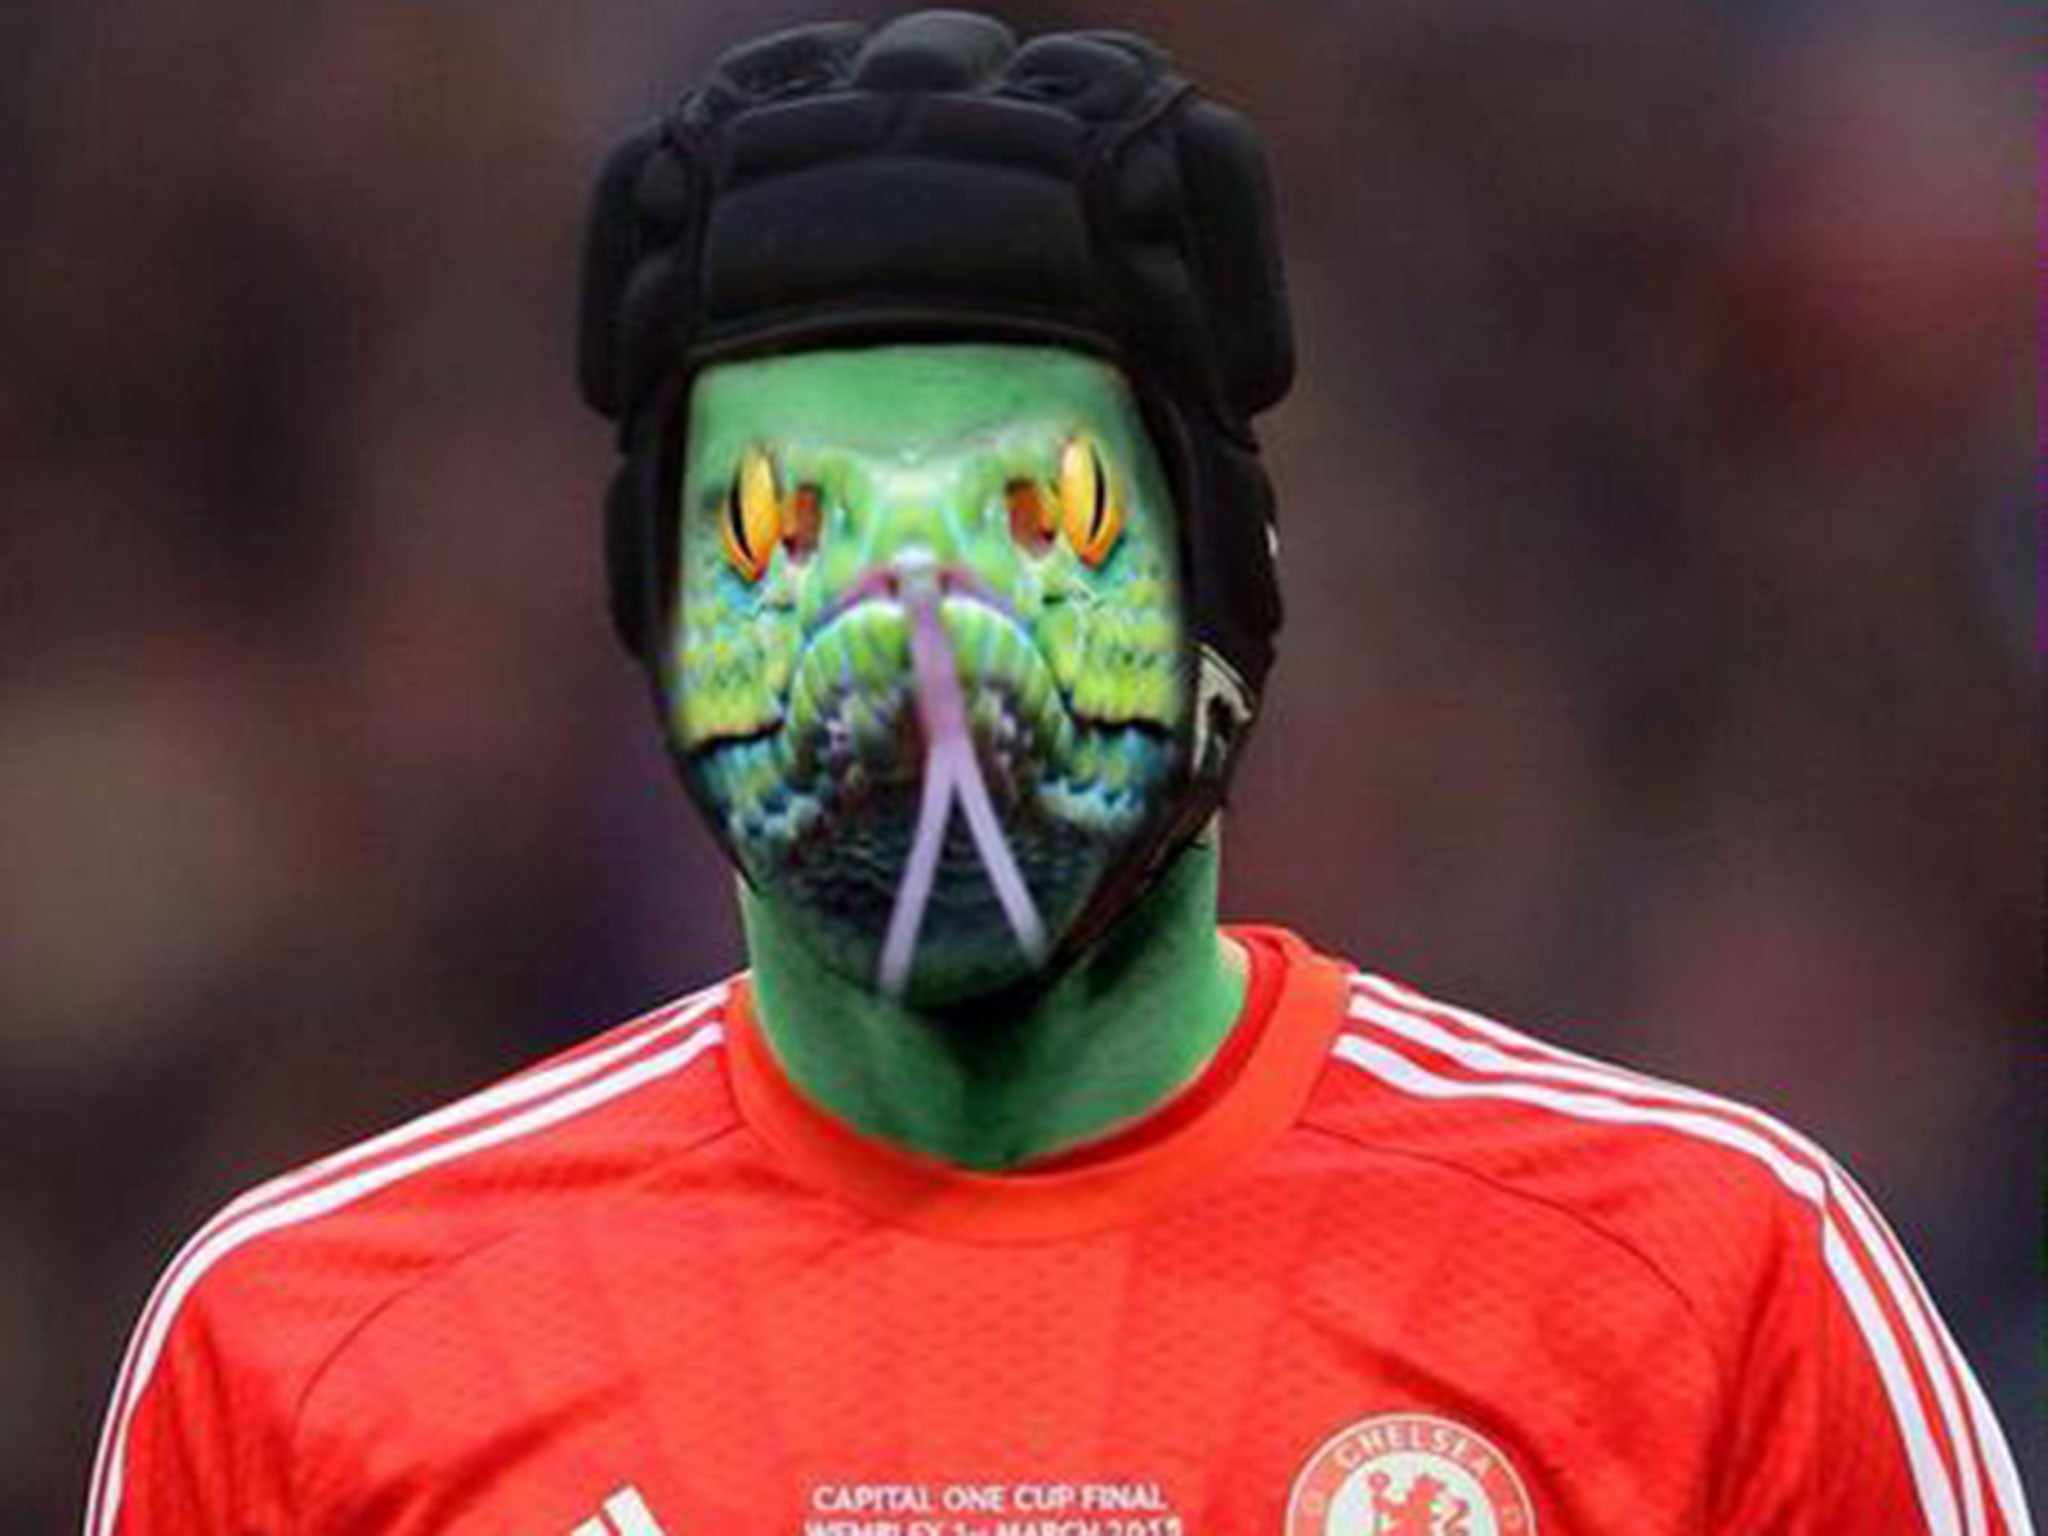 One angry Chelsea fan posted a picture of Petr Cech as a snake